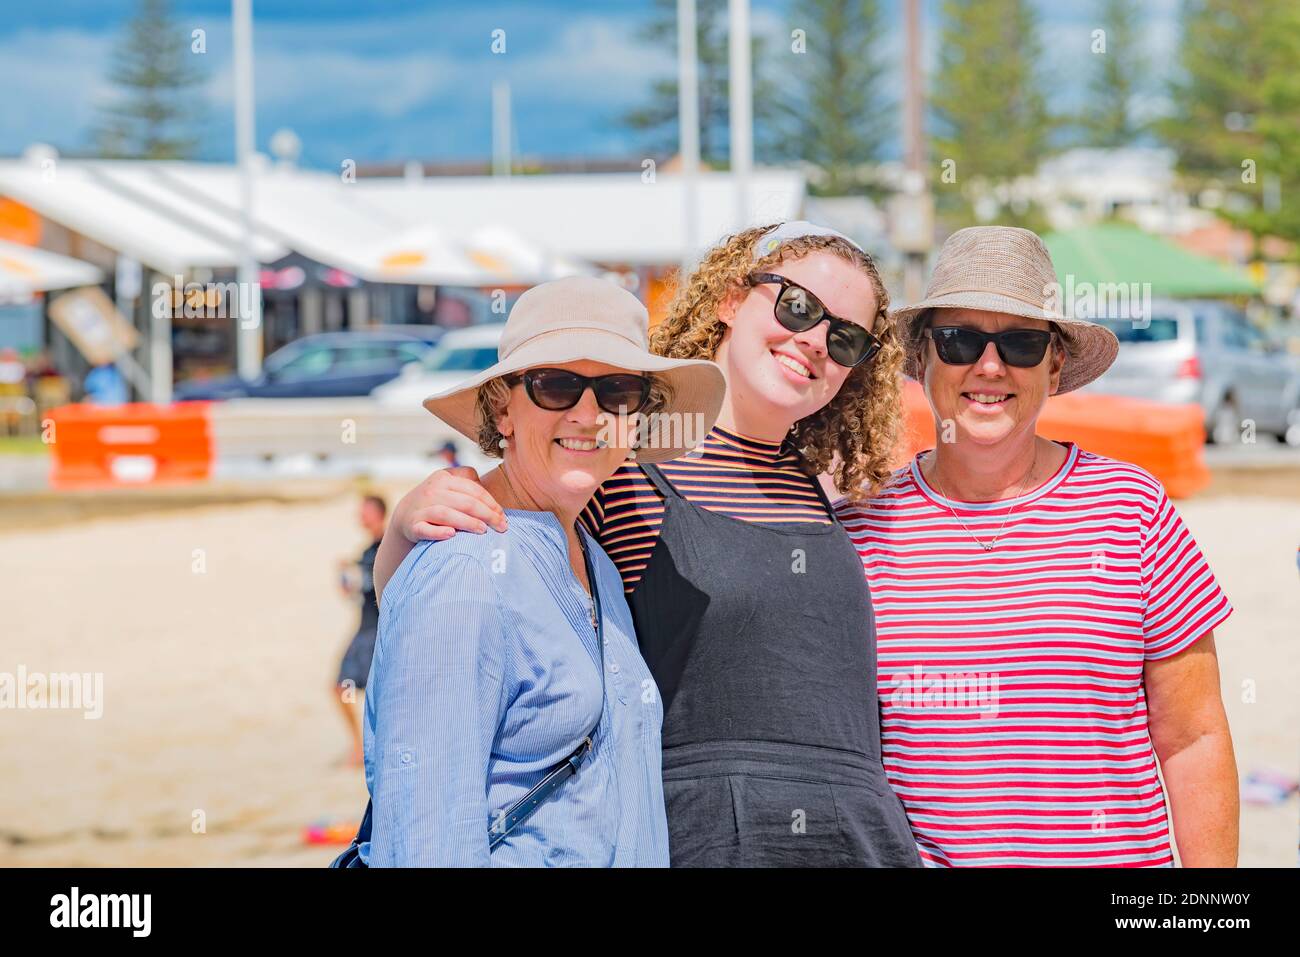 https://c8.alamy.com/comp/2DNNW0Y/two-middle-aged-women-wearing-hats-and-sunglasses-stand-with-a-teenaged-girl-with-curly-hair-in-the-warm-australian-sun-beachside-at-forster-aust-2DNNW0Y.jpg